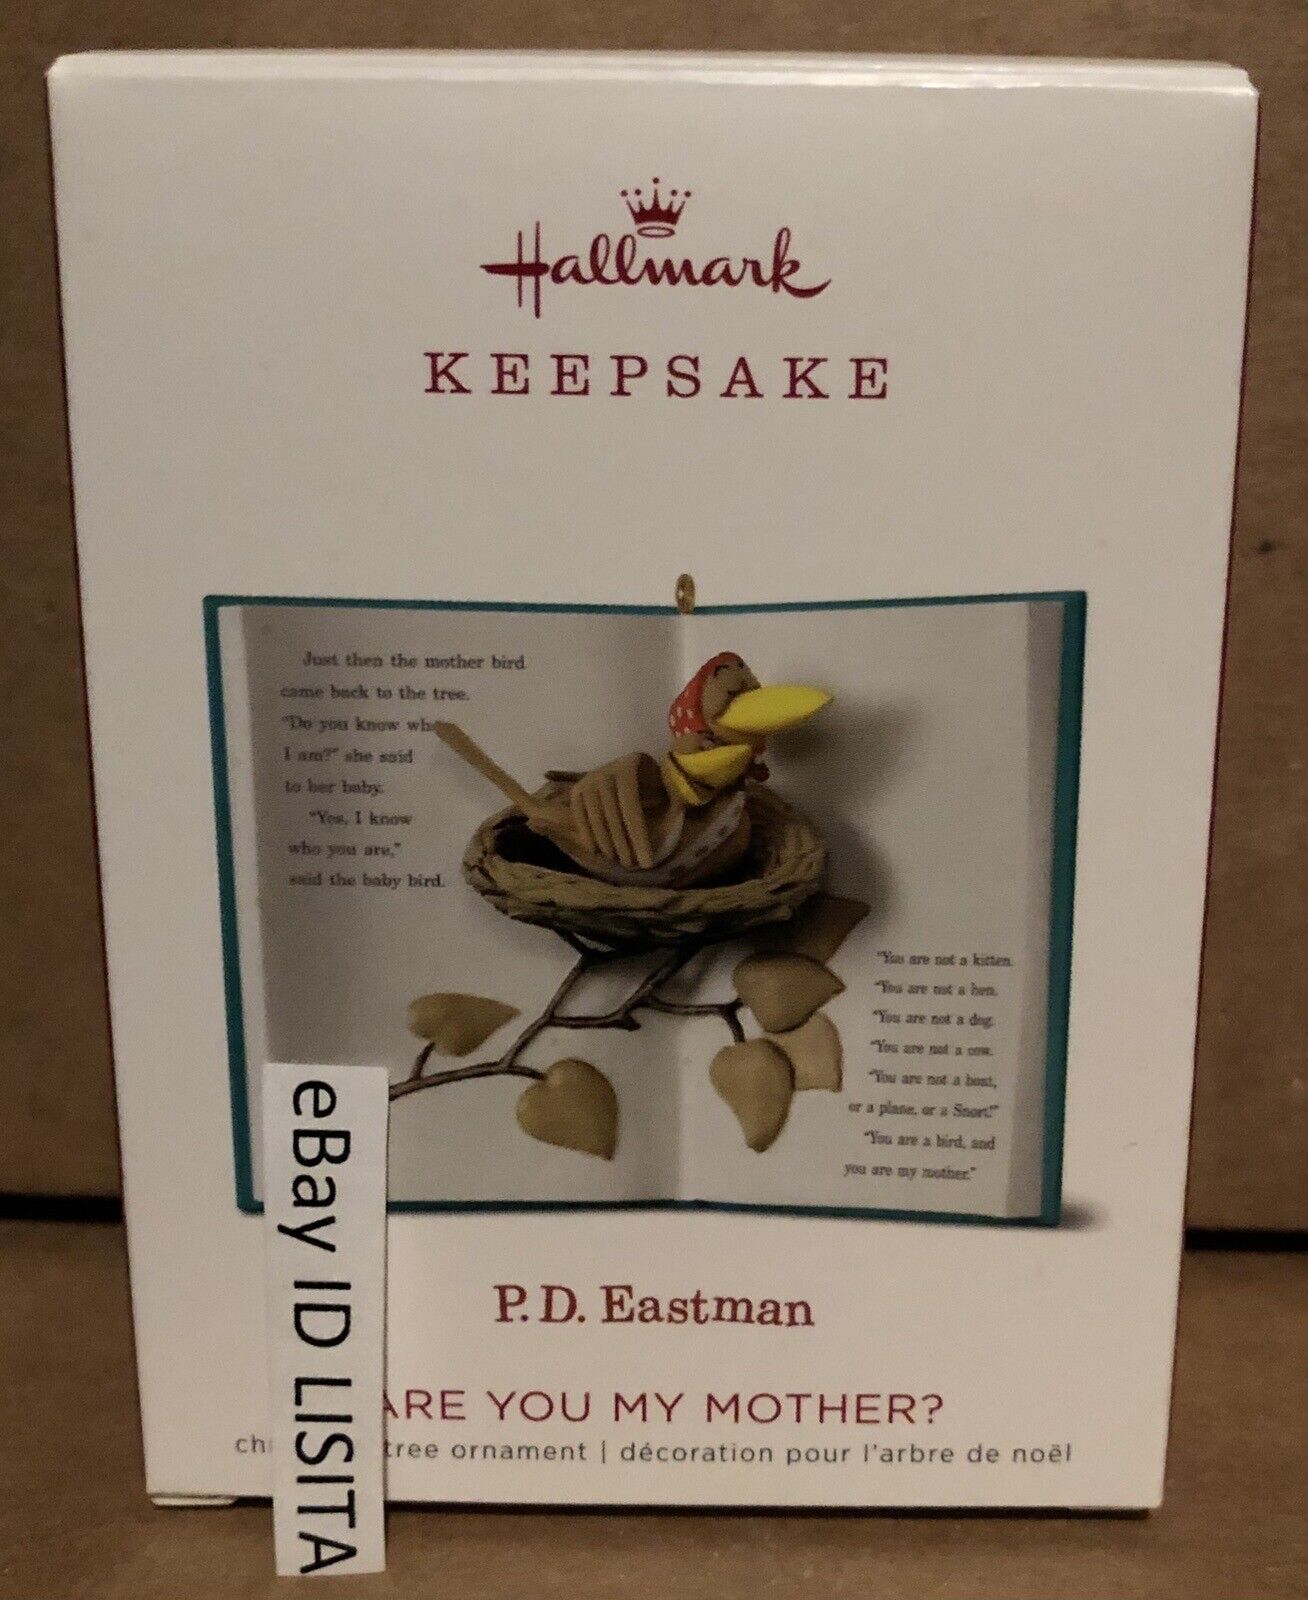 Hallmark 2018 Are You My Mother? P.D. Eastman Book Ornament MIMB